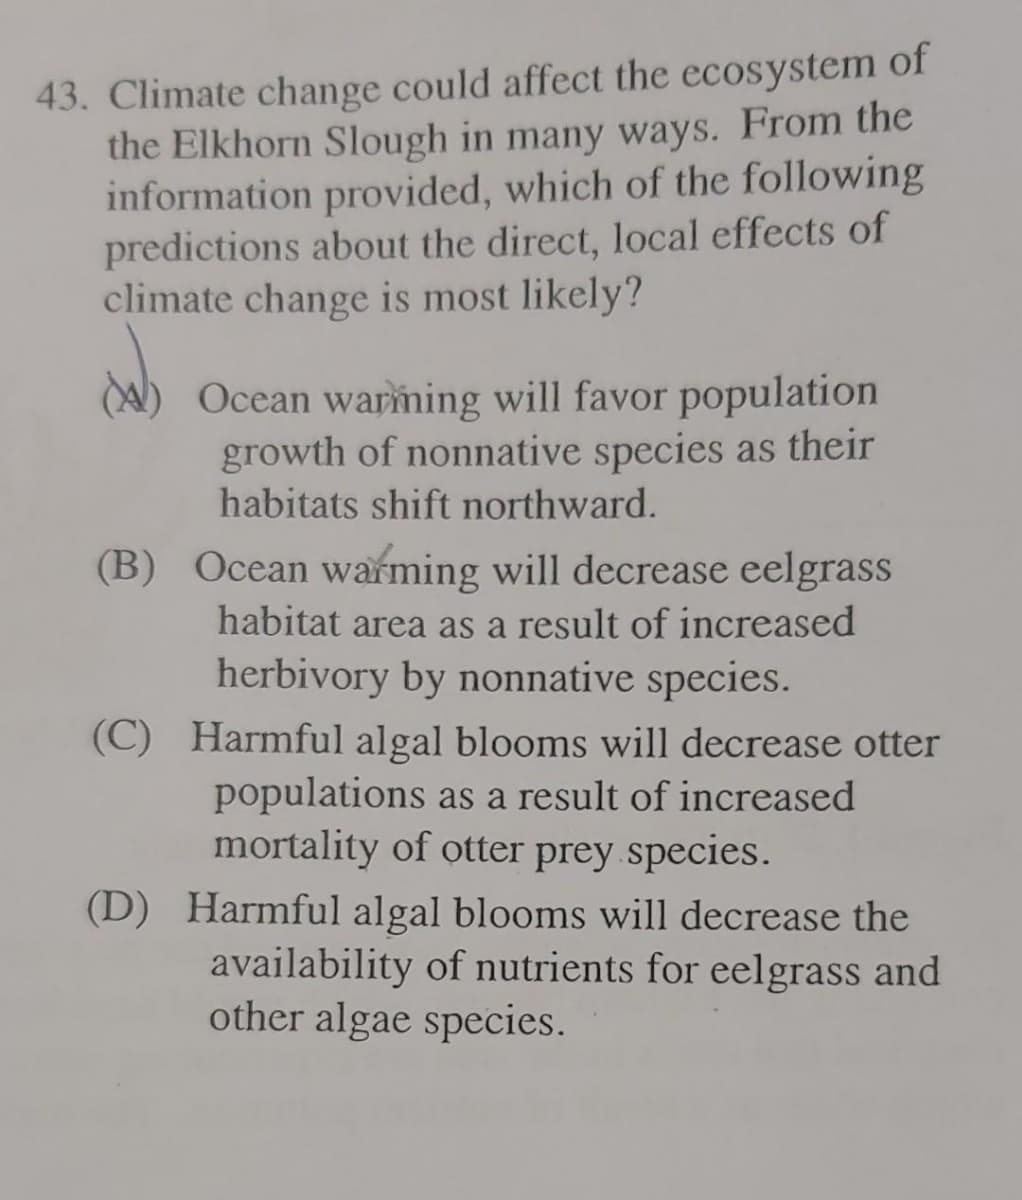 43. Climate change could affect the ecosystem of
the Elkhorn Slough in many ways. From the
information provided, which of the following
predictions about the direct, local effects of
climate change is most likely?
Ocean warming will favor population
growth of nonnative species as their
habitats shift northward.
(B) Ocean warming will decrease eelgrass
habitat area as a result of increased
herbivory by nonnative species.
(C) Harmful algal blooms will decrease otter
populations as a result of increased
mortality of otter prey species.
(D) Harmful algal blooms will decrease the
availability of nutrients for eelgrass and
other algae species.